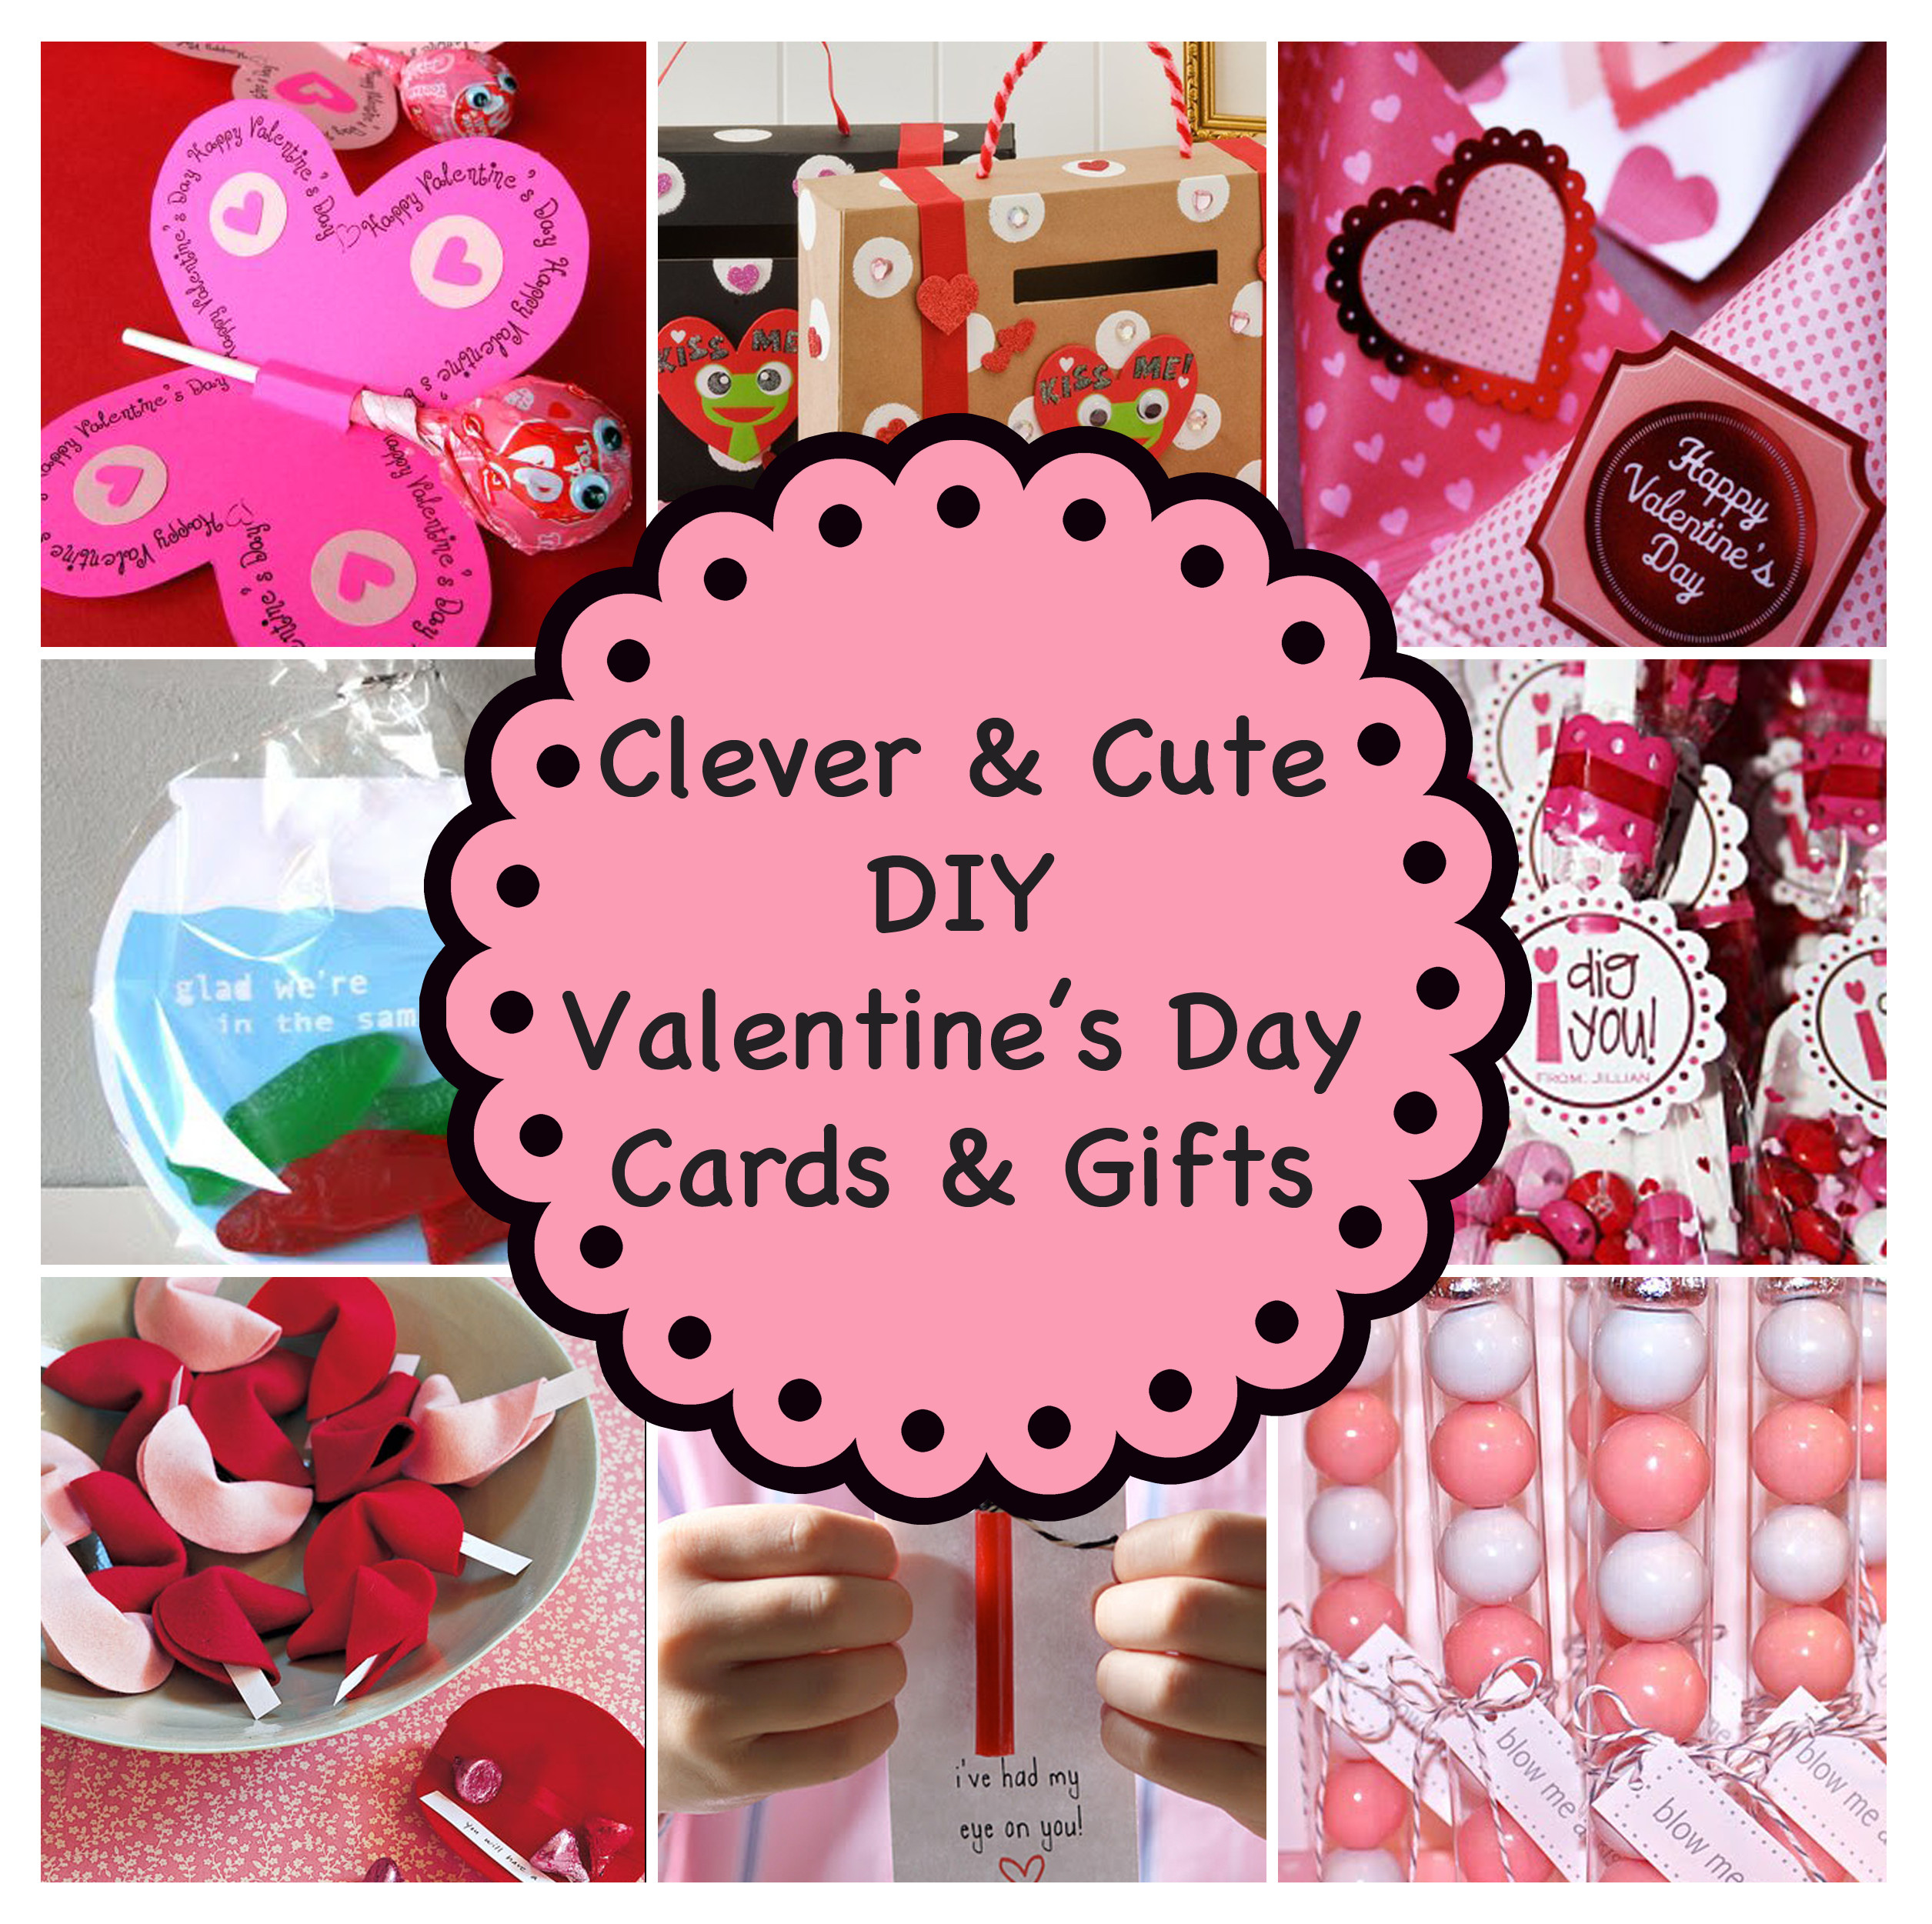 Valentines Day Card Ideas
 Clever and Cute DIY Valentine’s Day Cards & Gifts